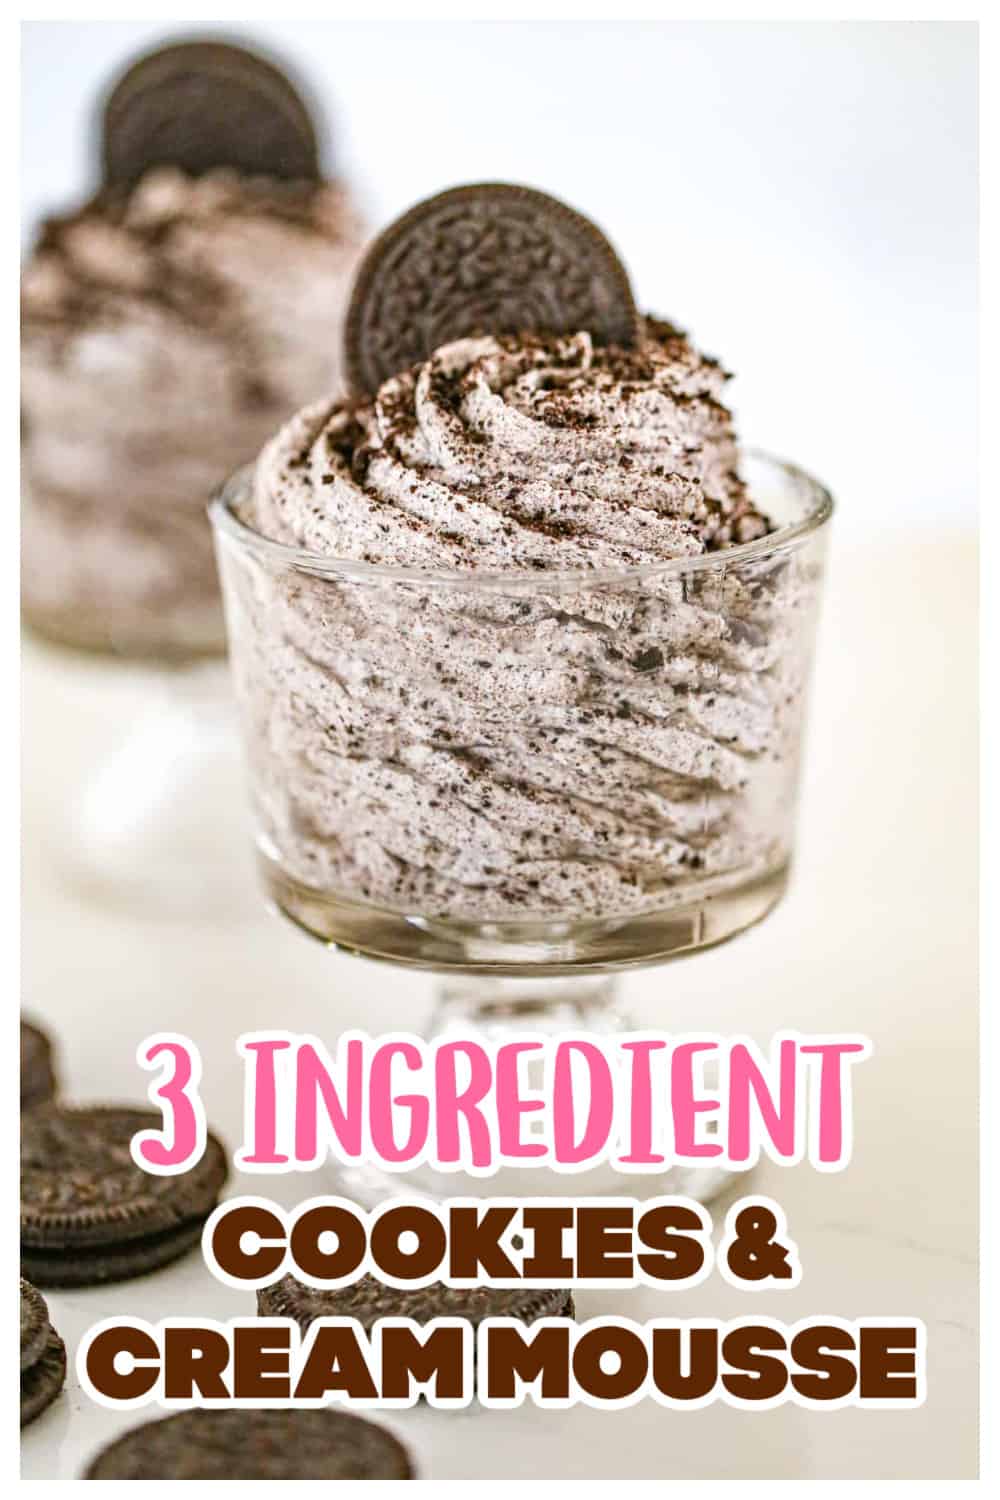 Cookies and Cream Mousse - 3 Ingredients 